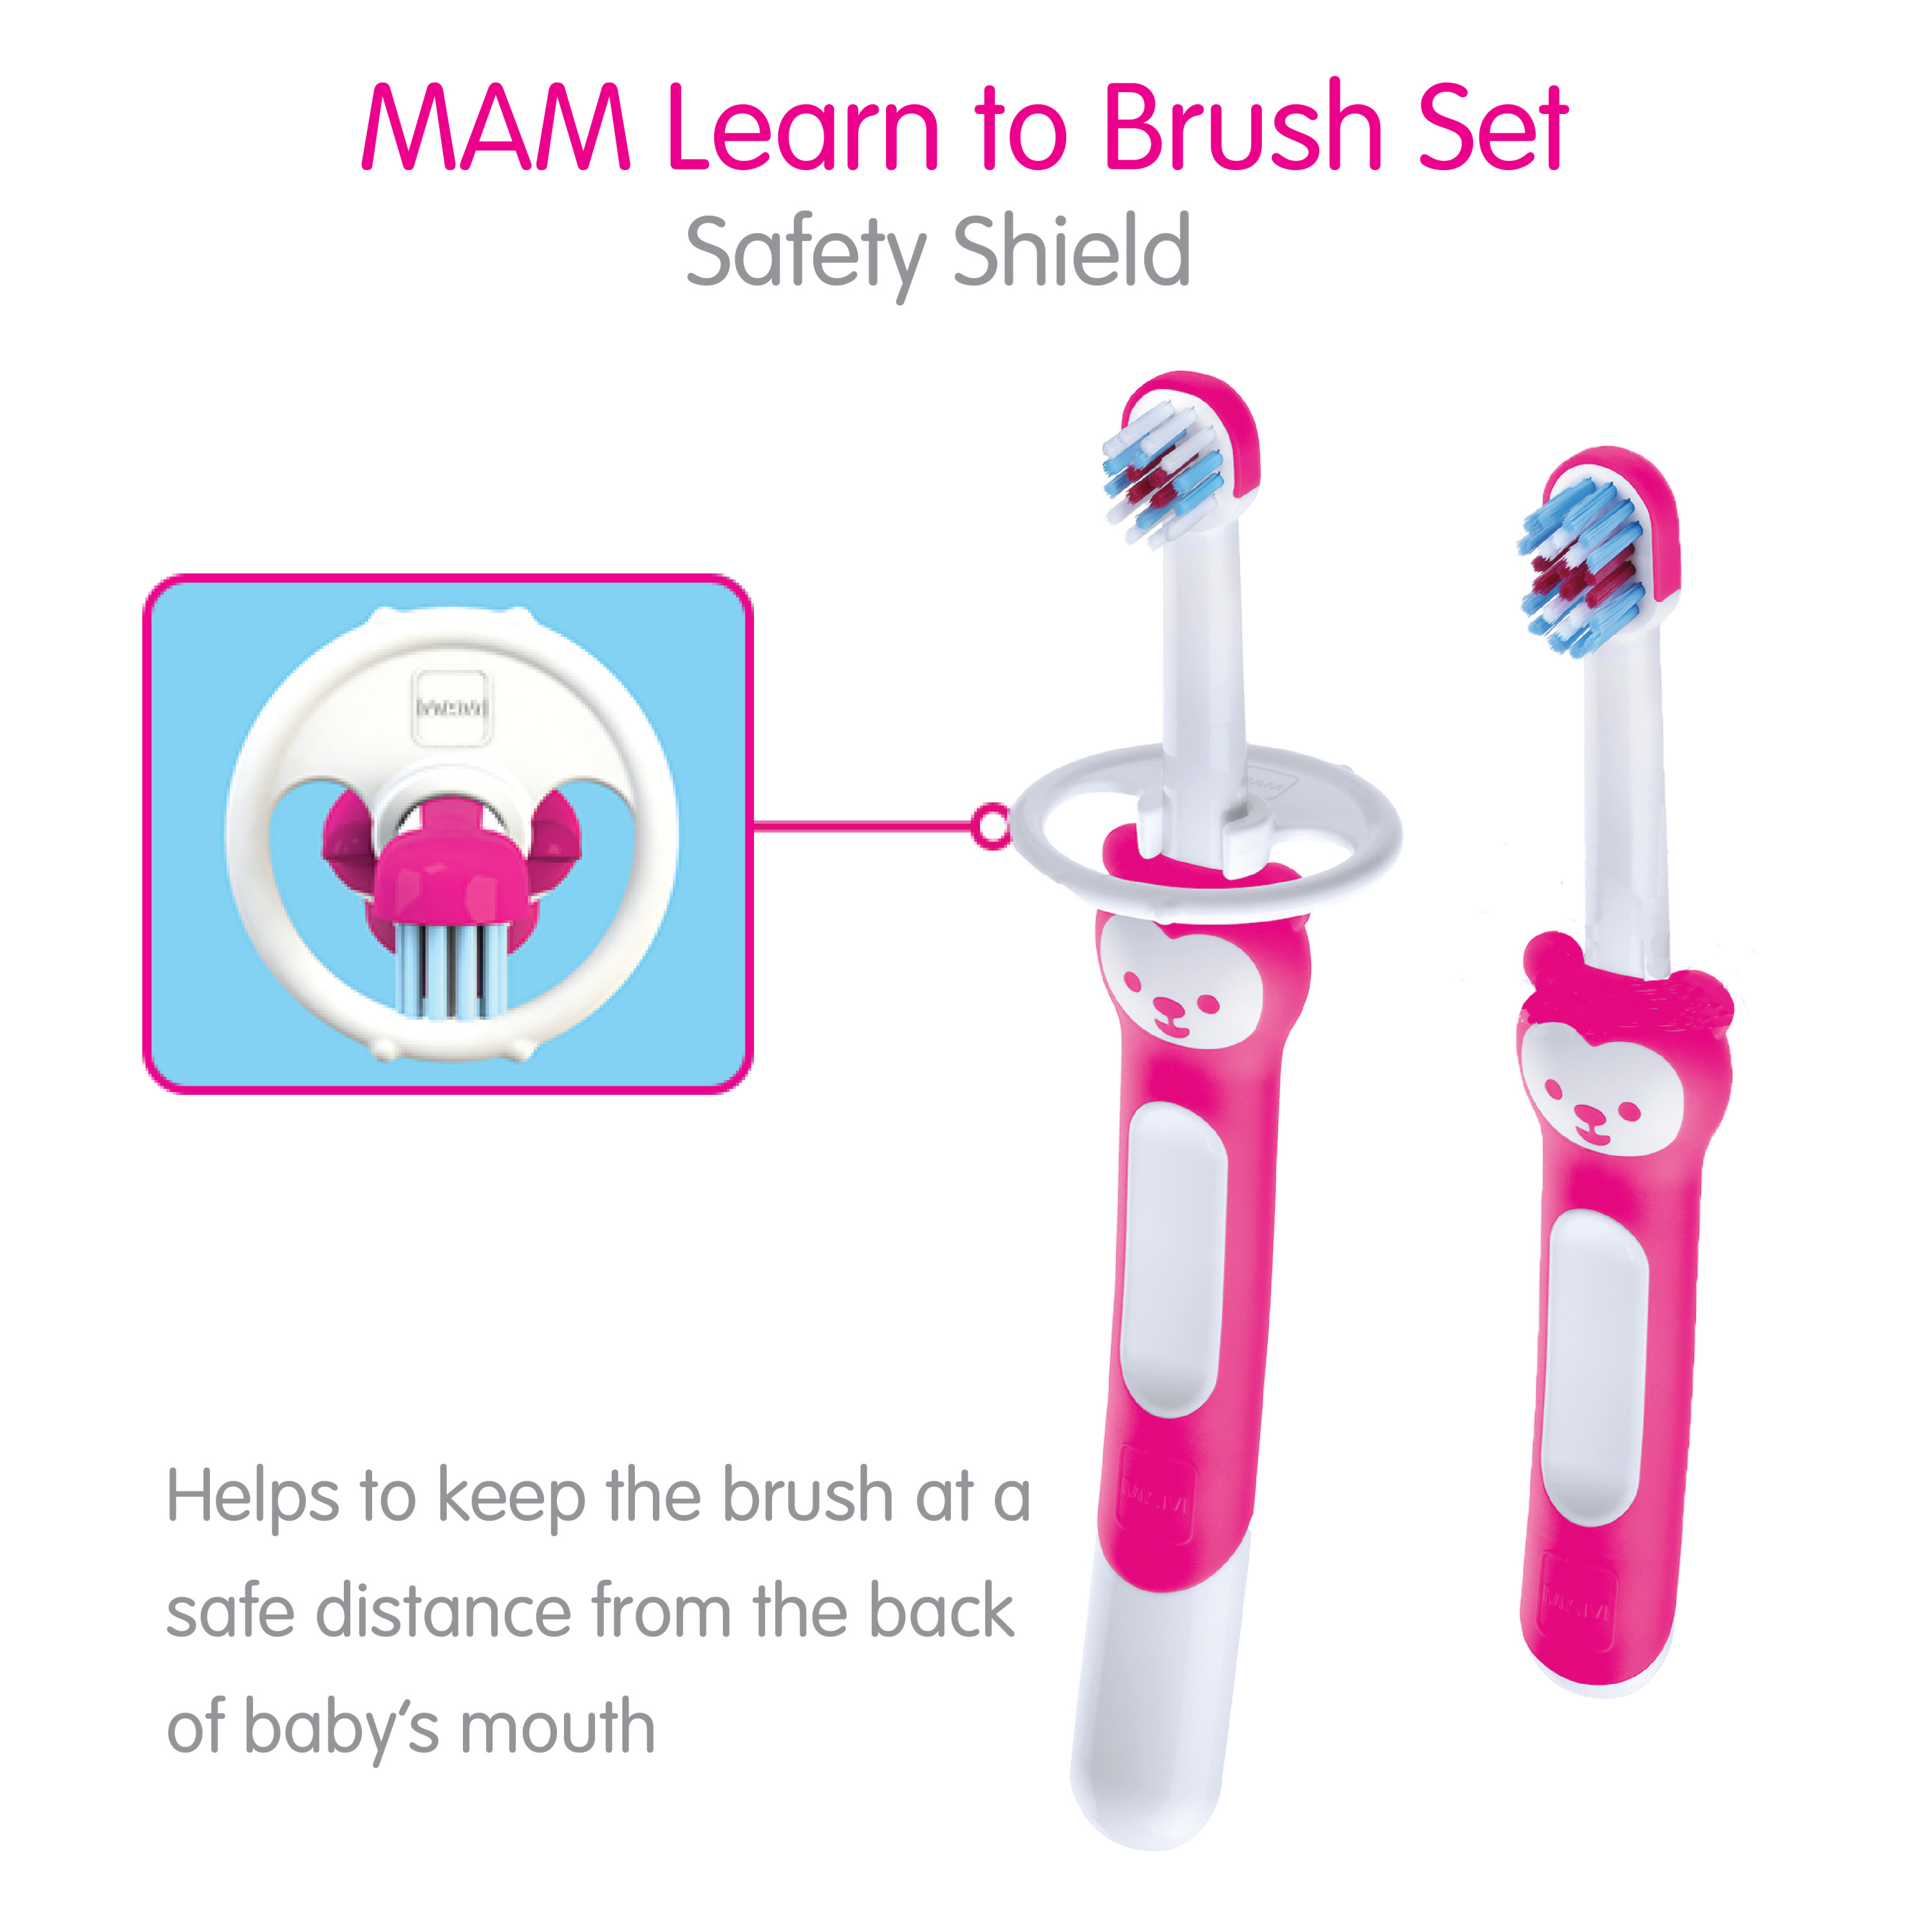 MAM Learn to Brush Set, 5+ Months, Boy, 2 Pack - image 4 of 10